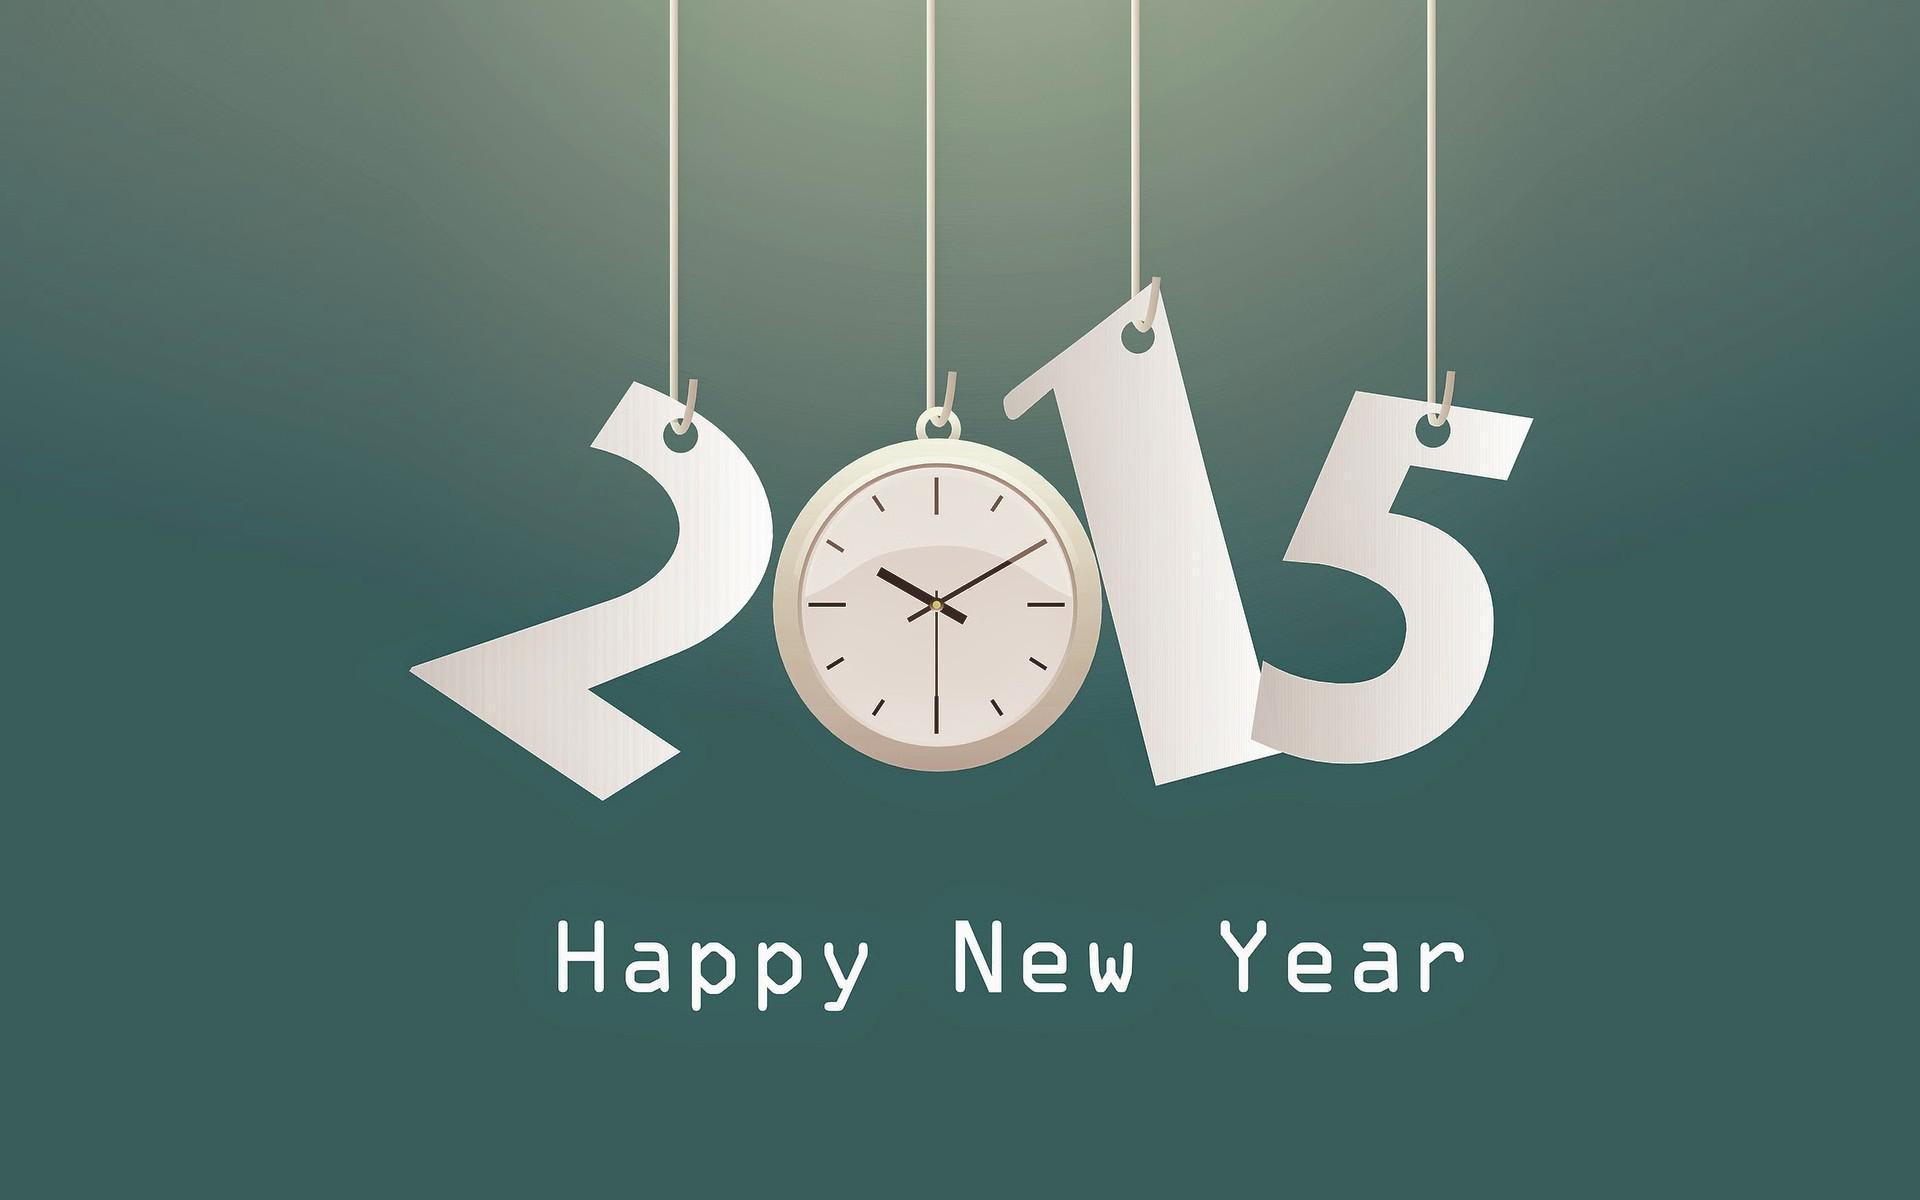 Coming Happy New Year 2015 Wallpaper